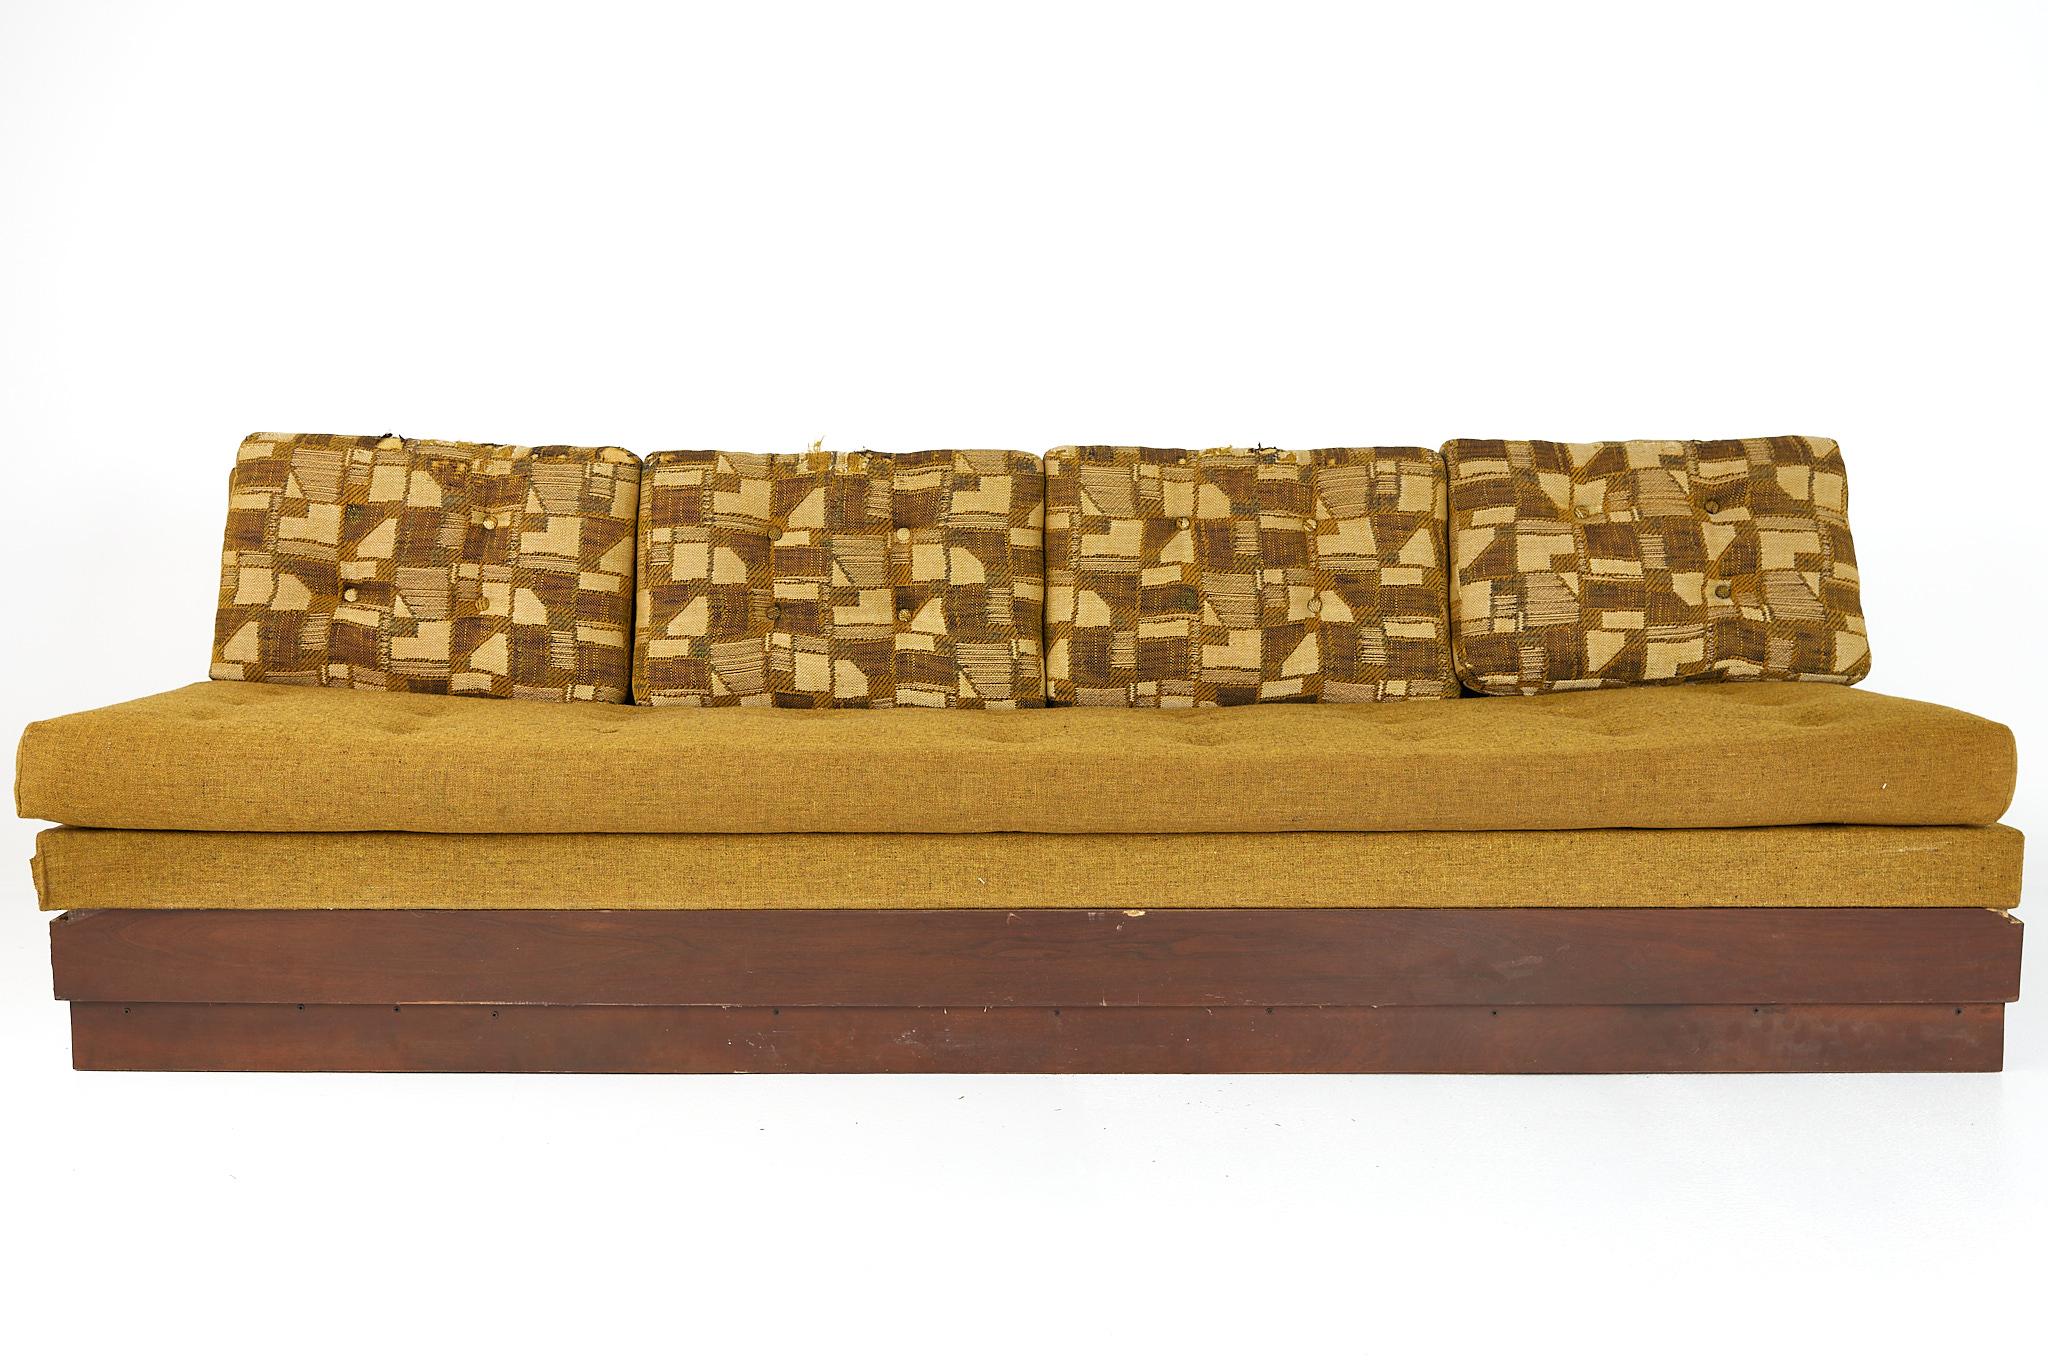 Adrian Pearsall for Craft Associates mid century armless sofa

This sofa measures: 96 wide x 32 deep x 28.5 inches high, with a seat height of 18 inches

Ready for new upholstery

?All pieces of furniture can be had in what we call restored